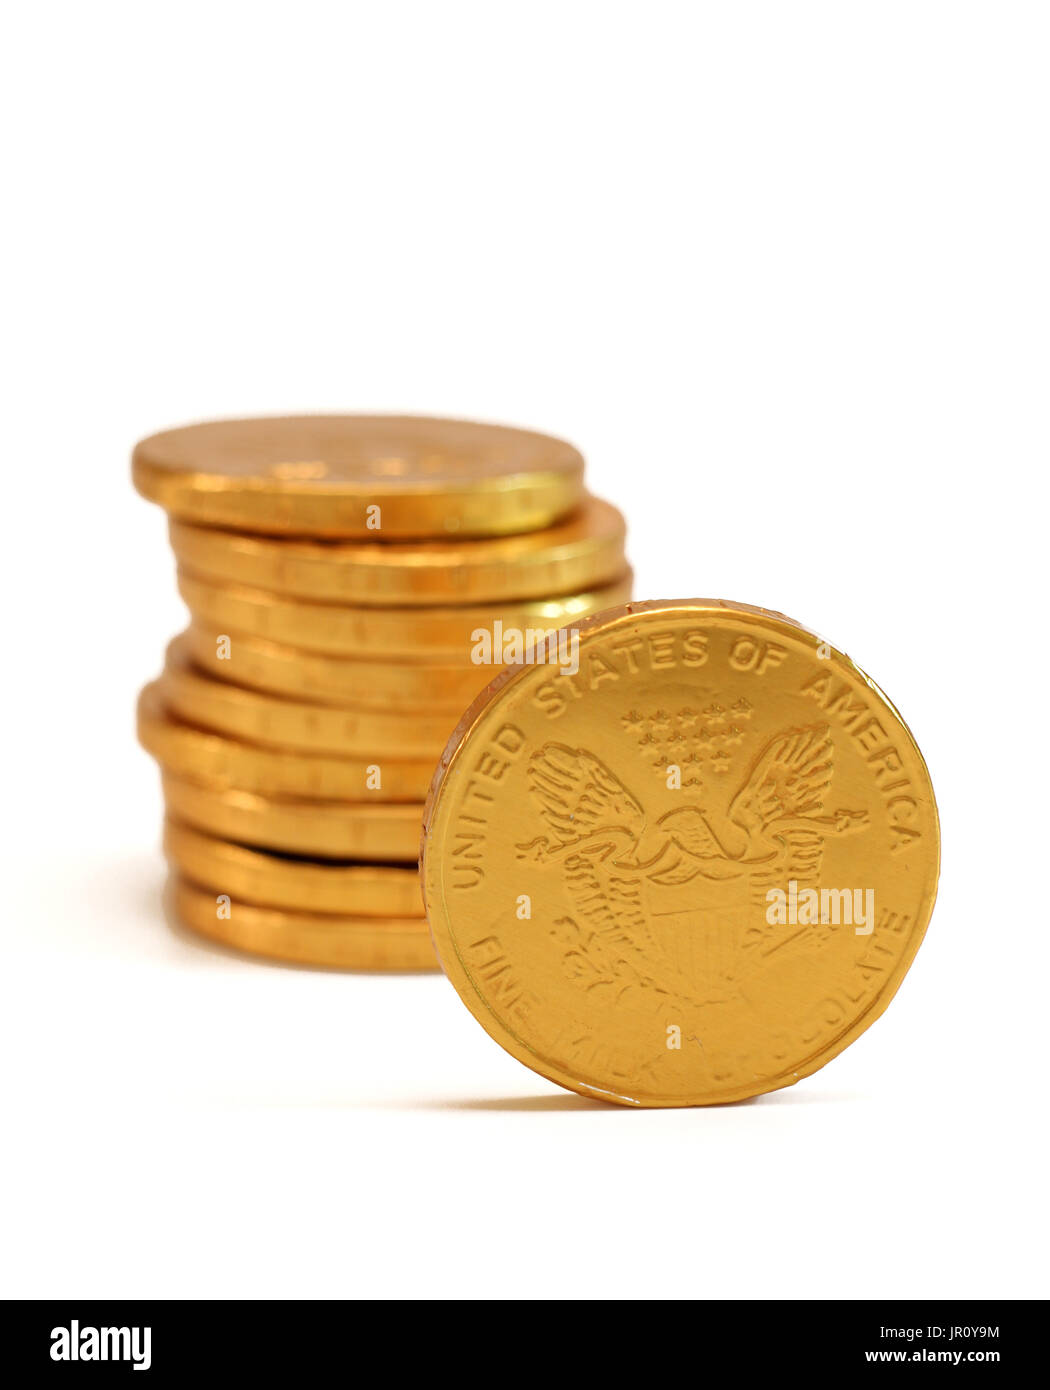 Chocolate gold coins isolated on a white background Stock Photo